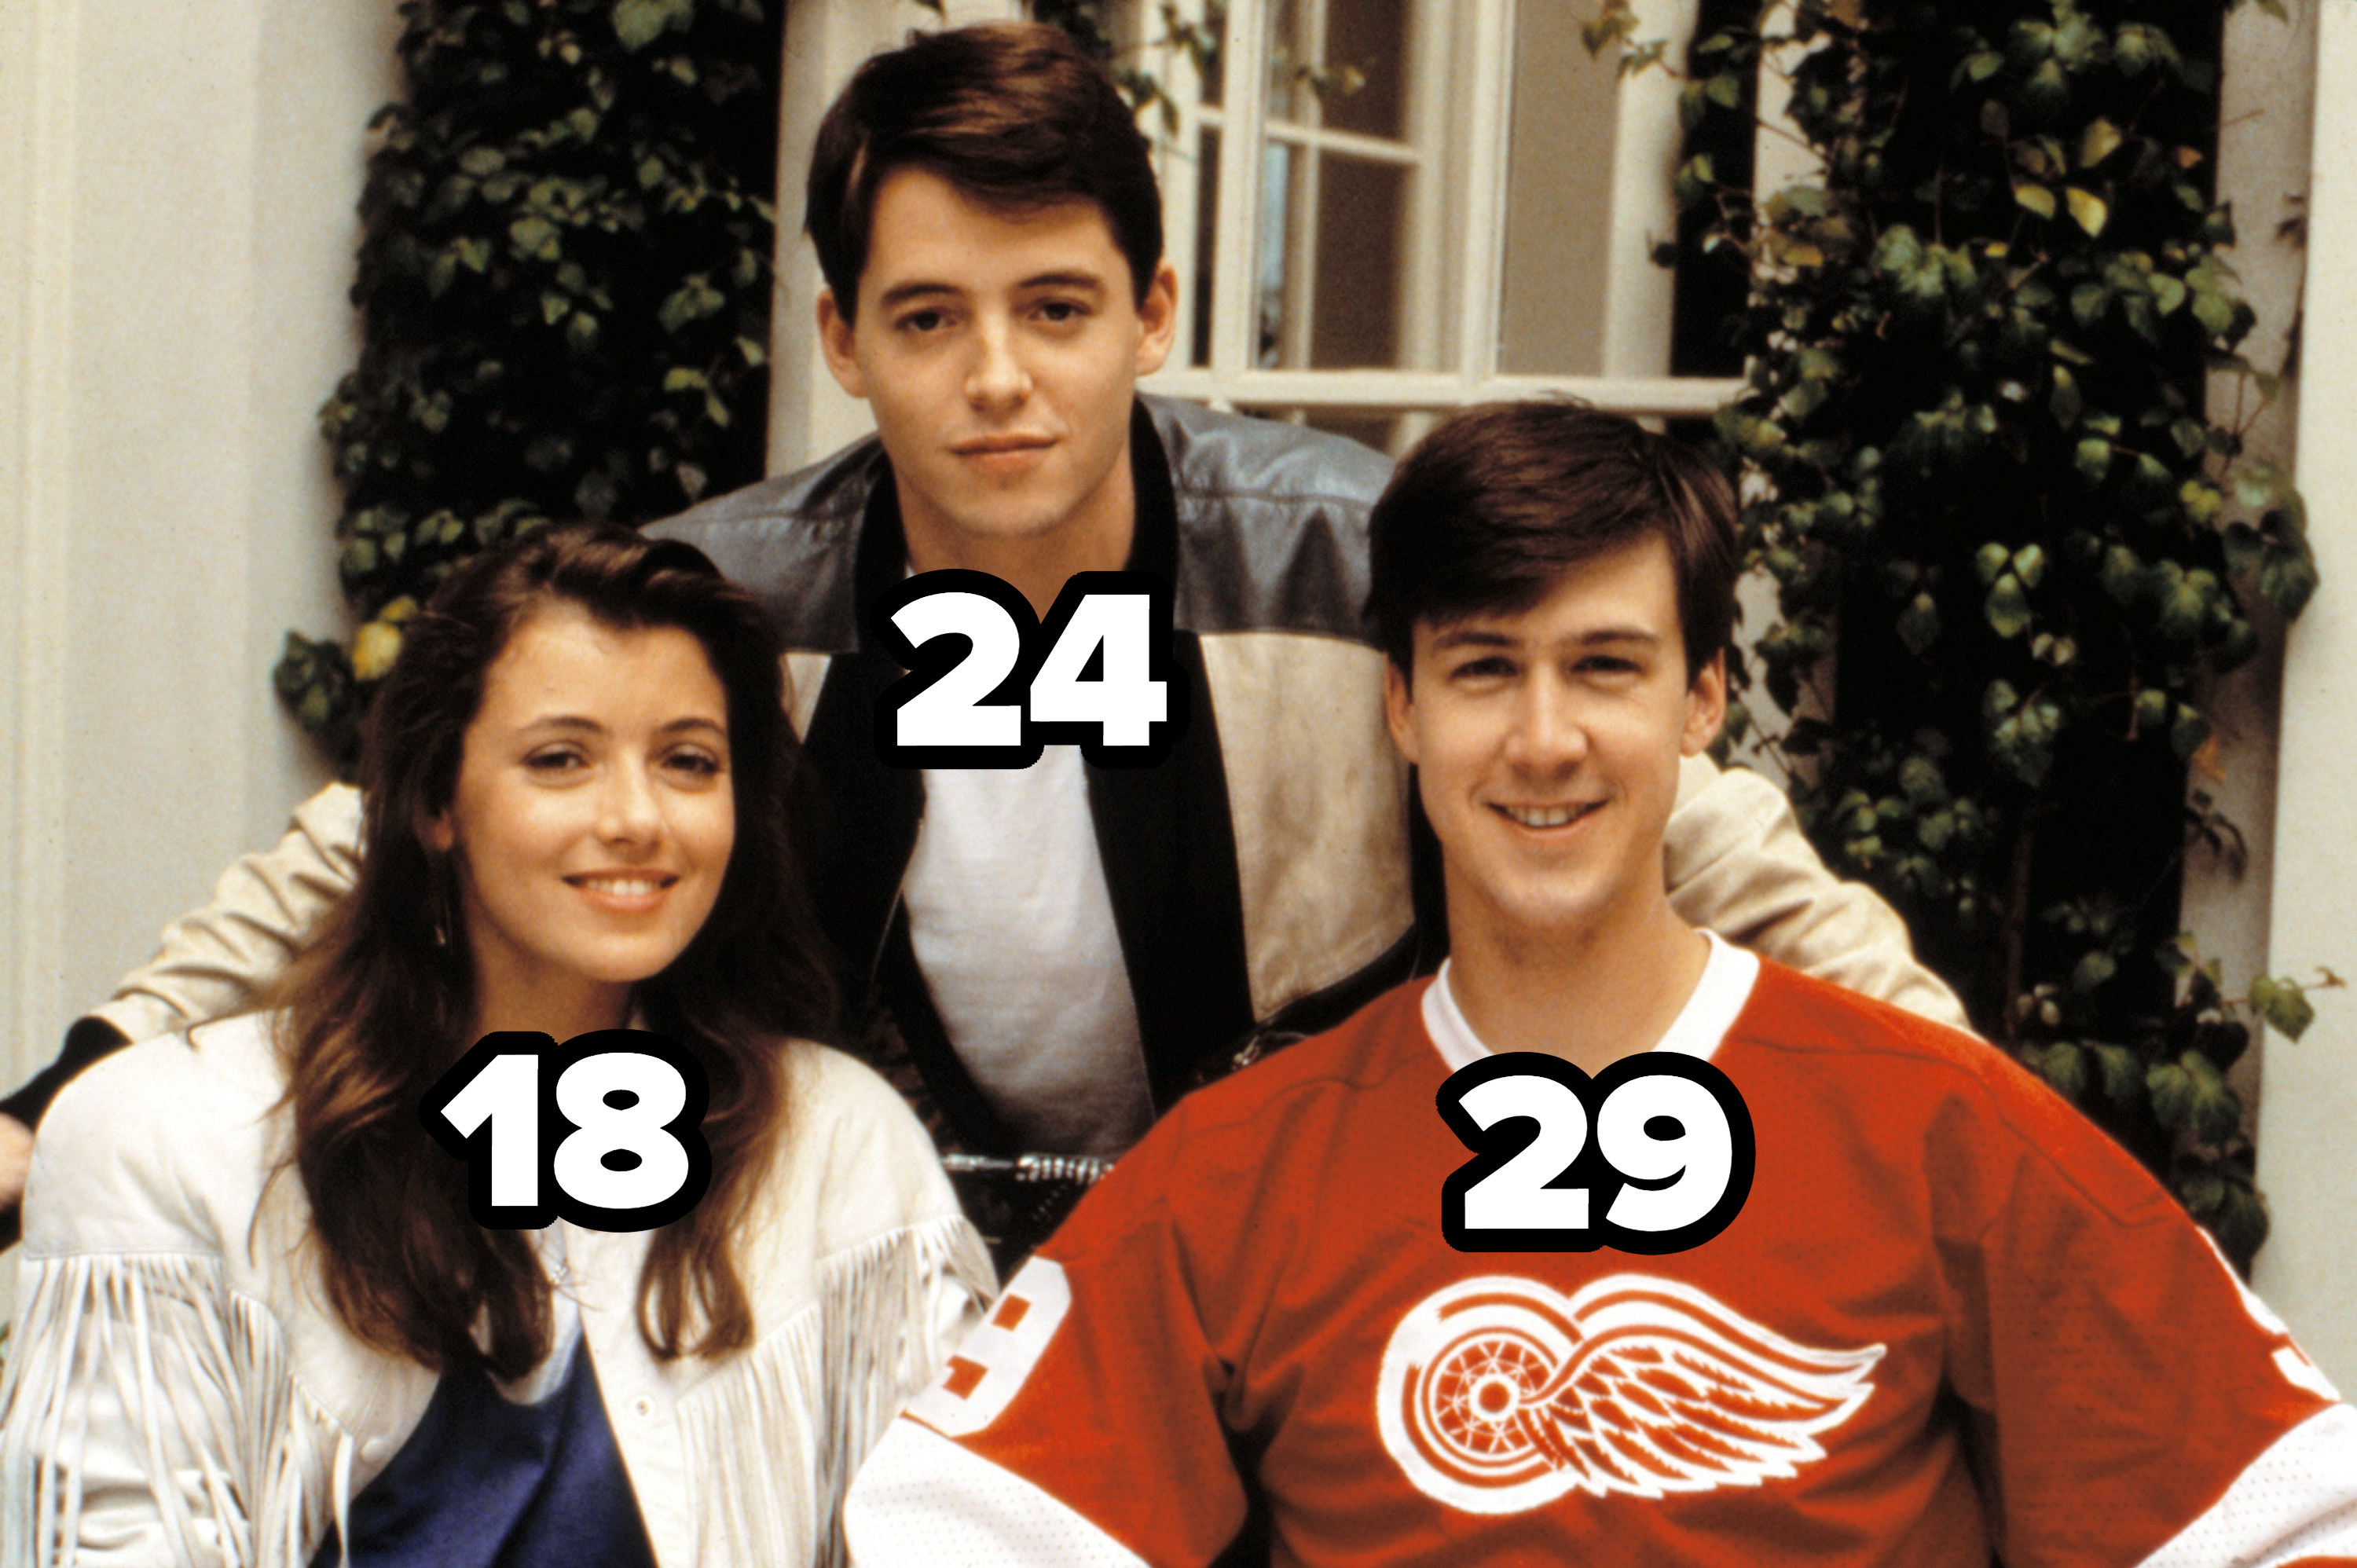 Sloane labeled 18, Ferris labeled 24, and Cameron labeled 29